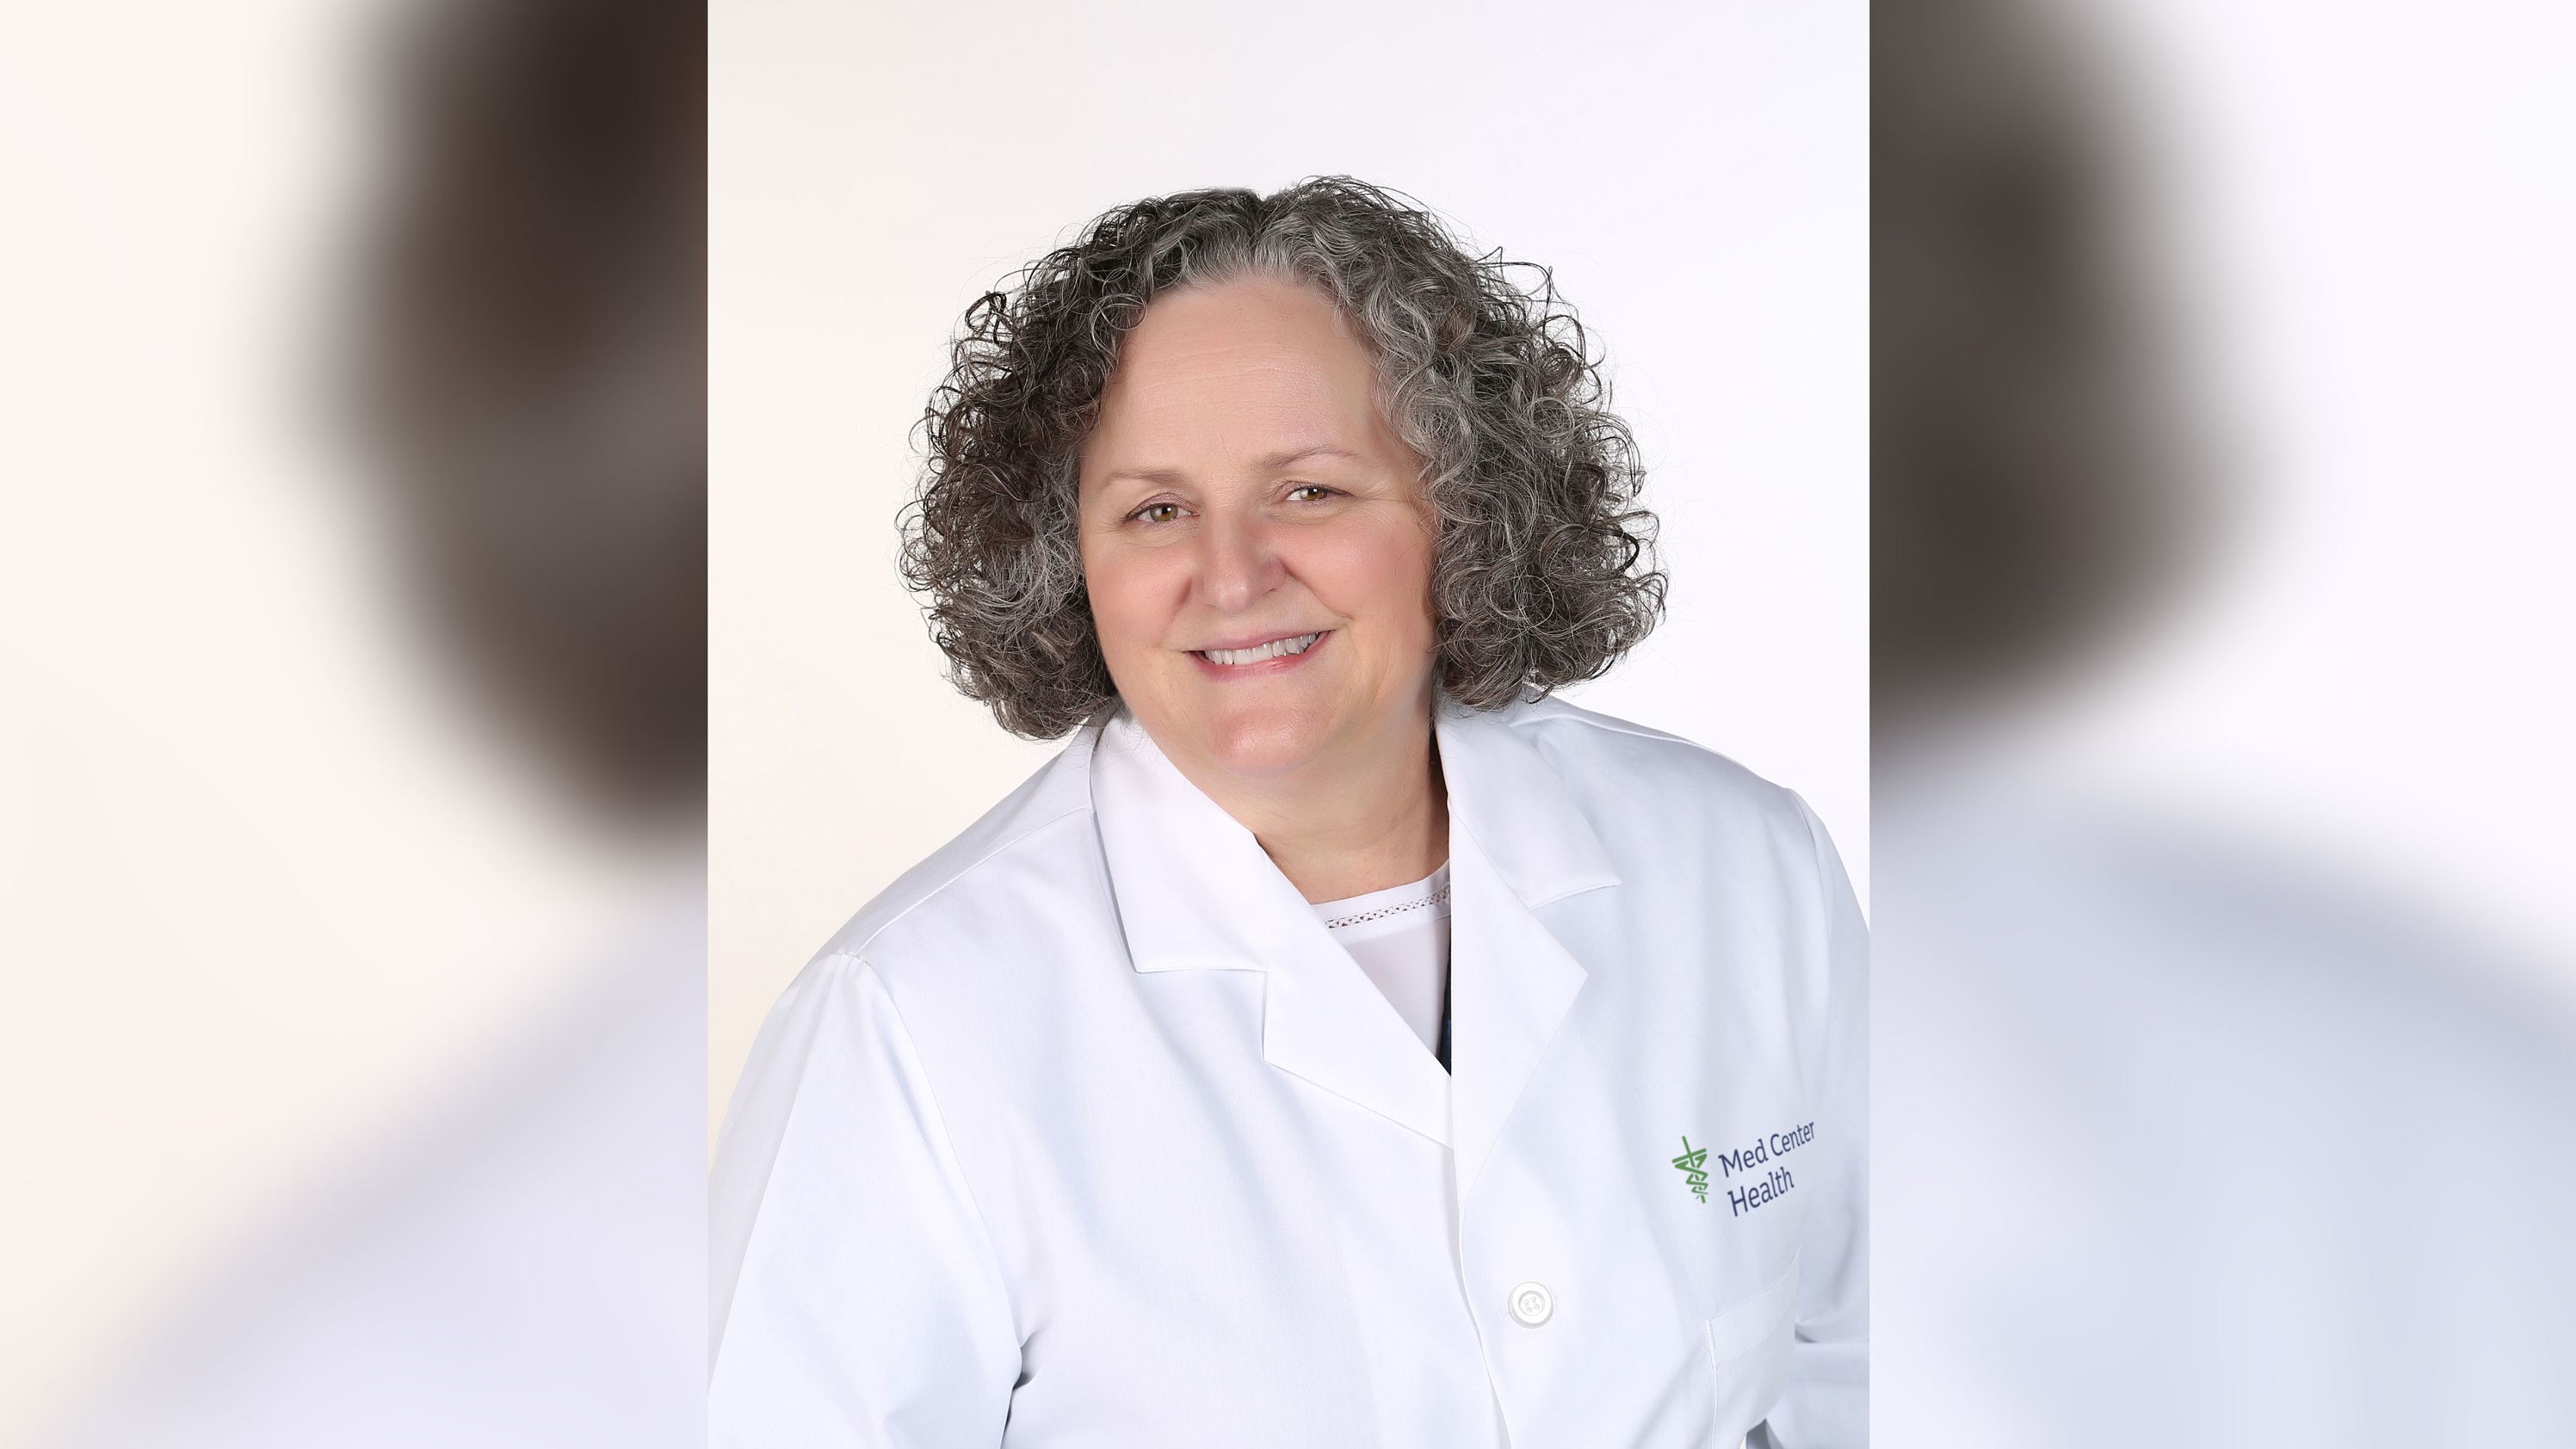 Dr. Rebecca Shadowen, a Kentucky physician who urged people to wear masks early on in the coronavirus pandemic, died earlier in September of Covid-19.